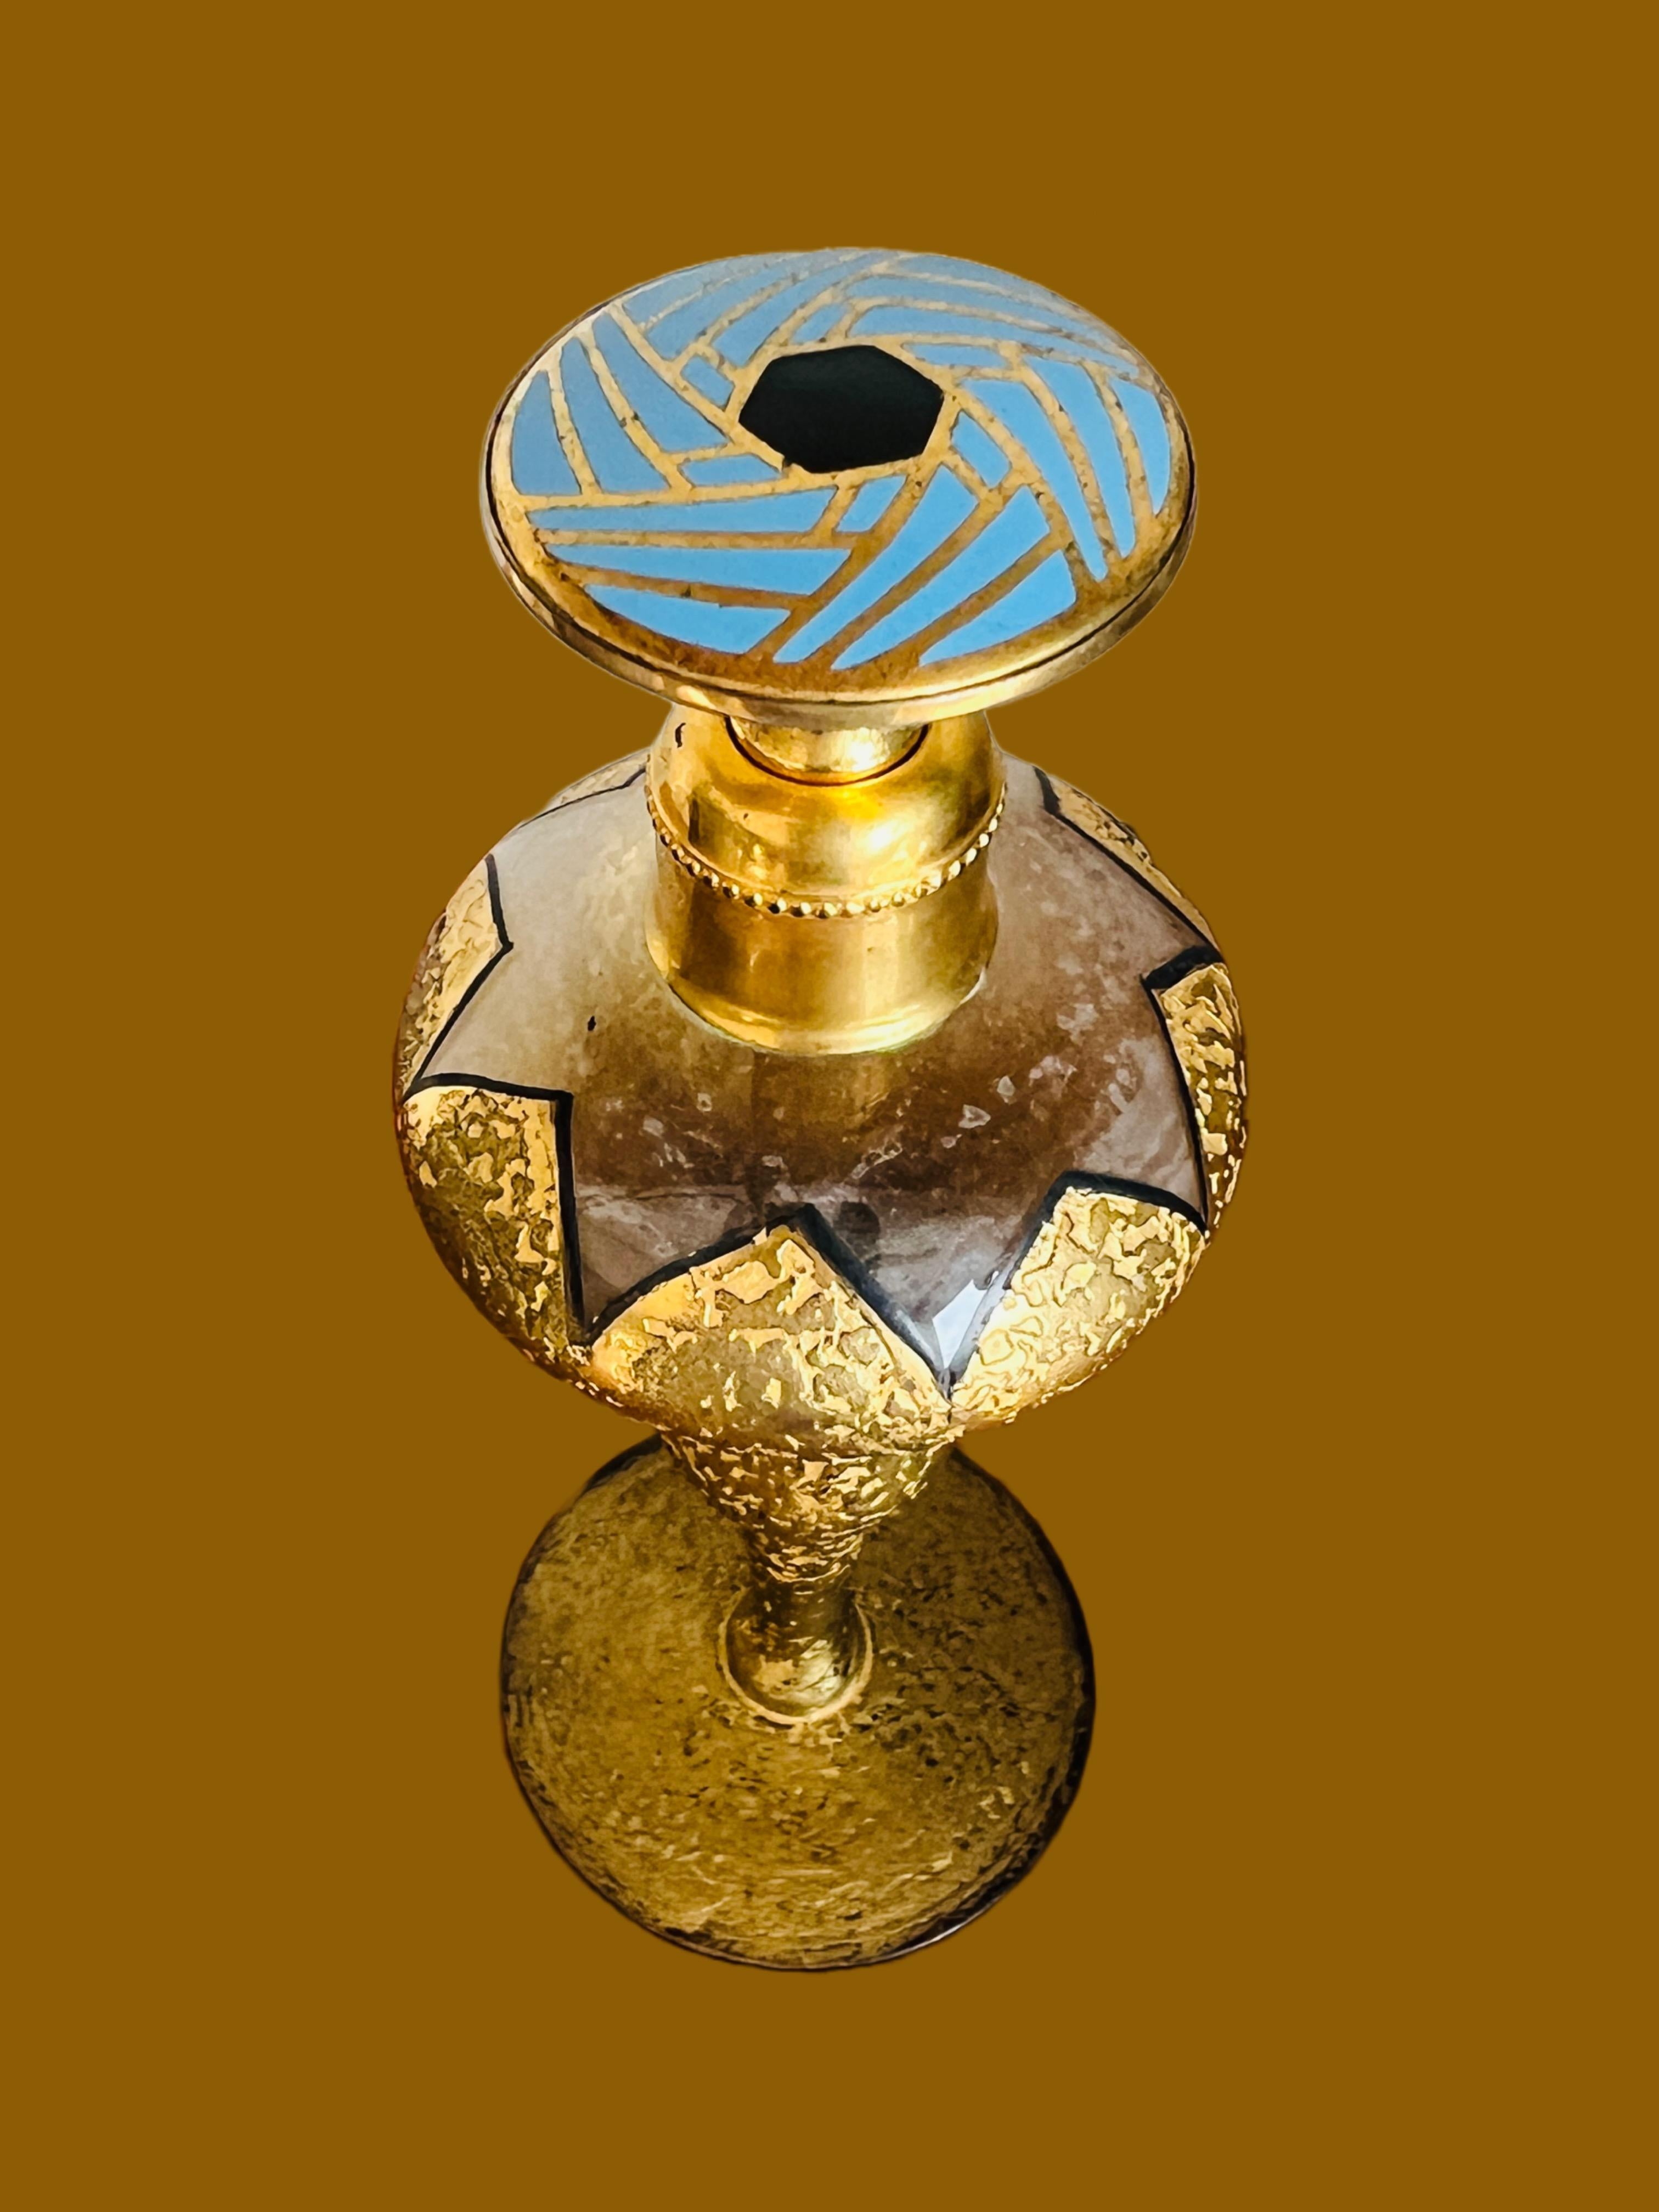 Very elegant DeVilbiss blue and black enamel gold encrusted perfume bottle from the roaring 20's. 

Size: 5-1/2